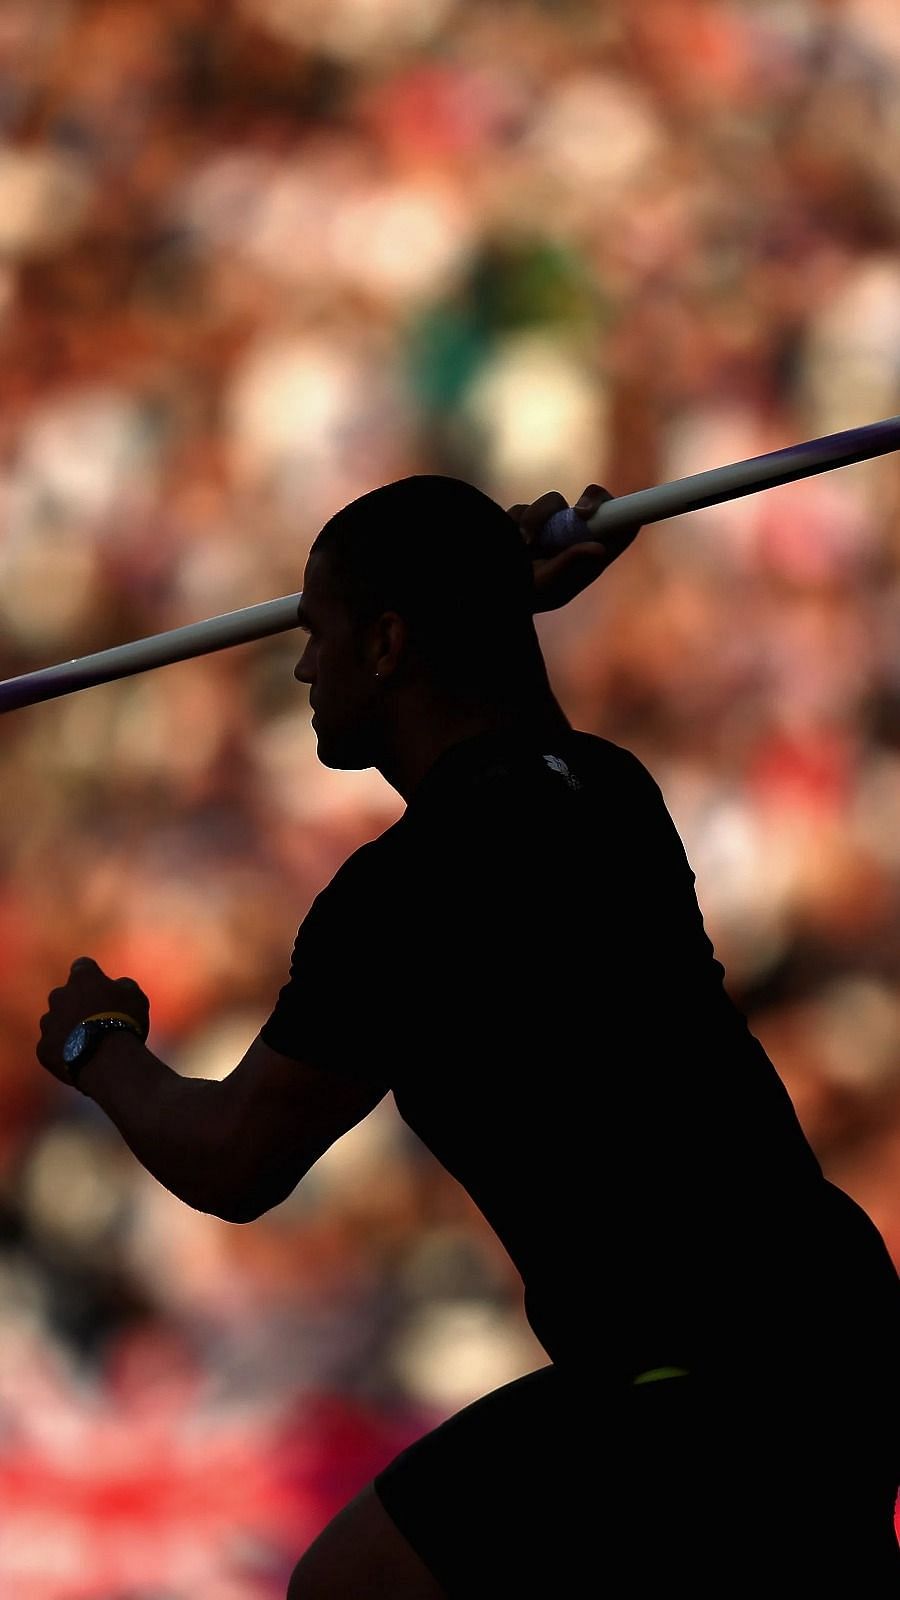 Summer Olympics Jan Zelezny Tops List Of Most Successful Male Javelin Throwers